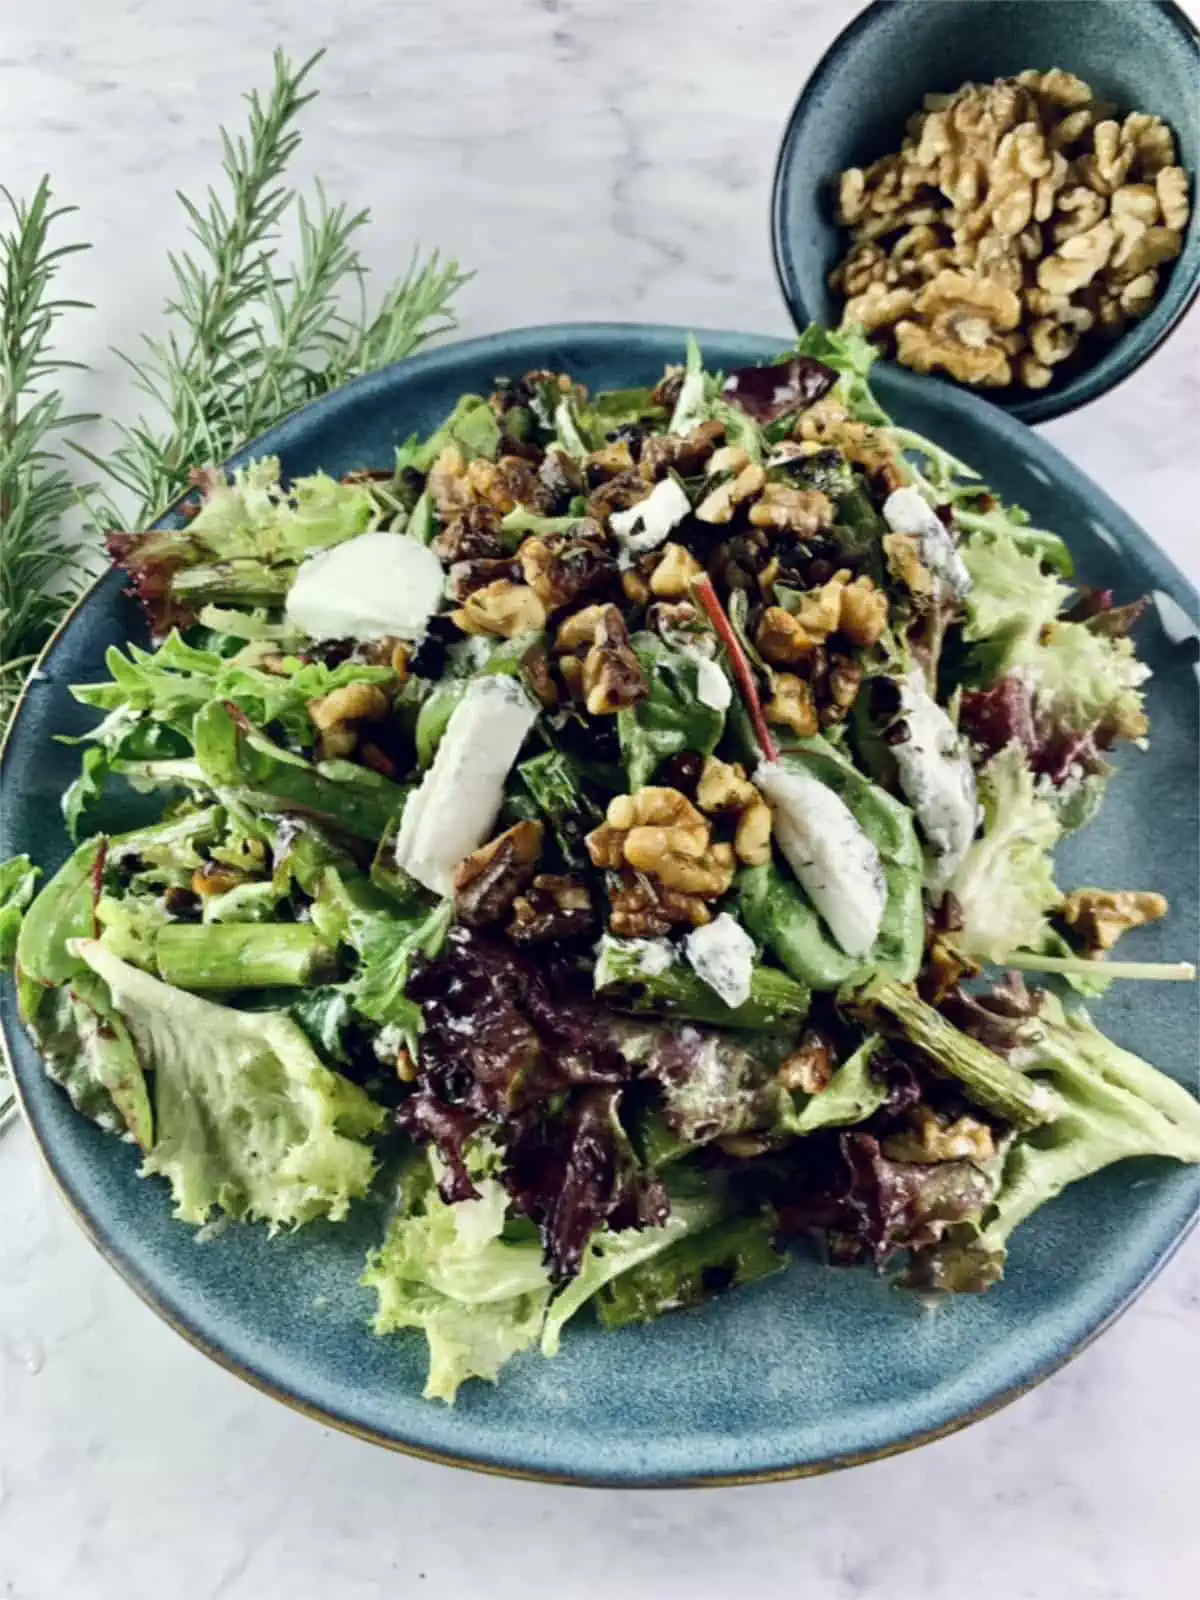 Barbecue asparagus salad on a blue plate with walnuts in top right corner and rosemary sprigs on the left.